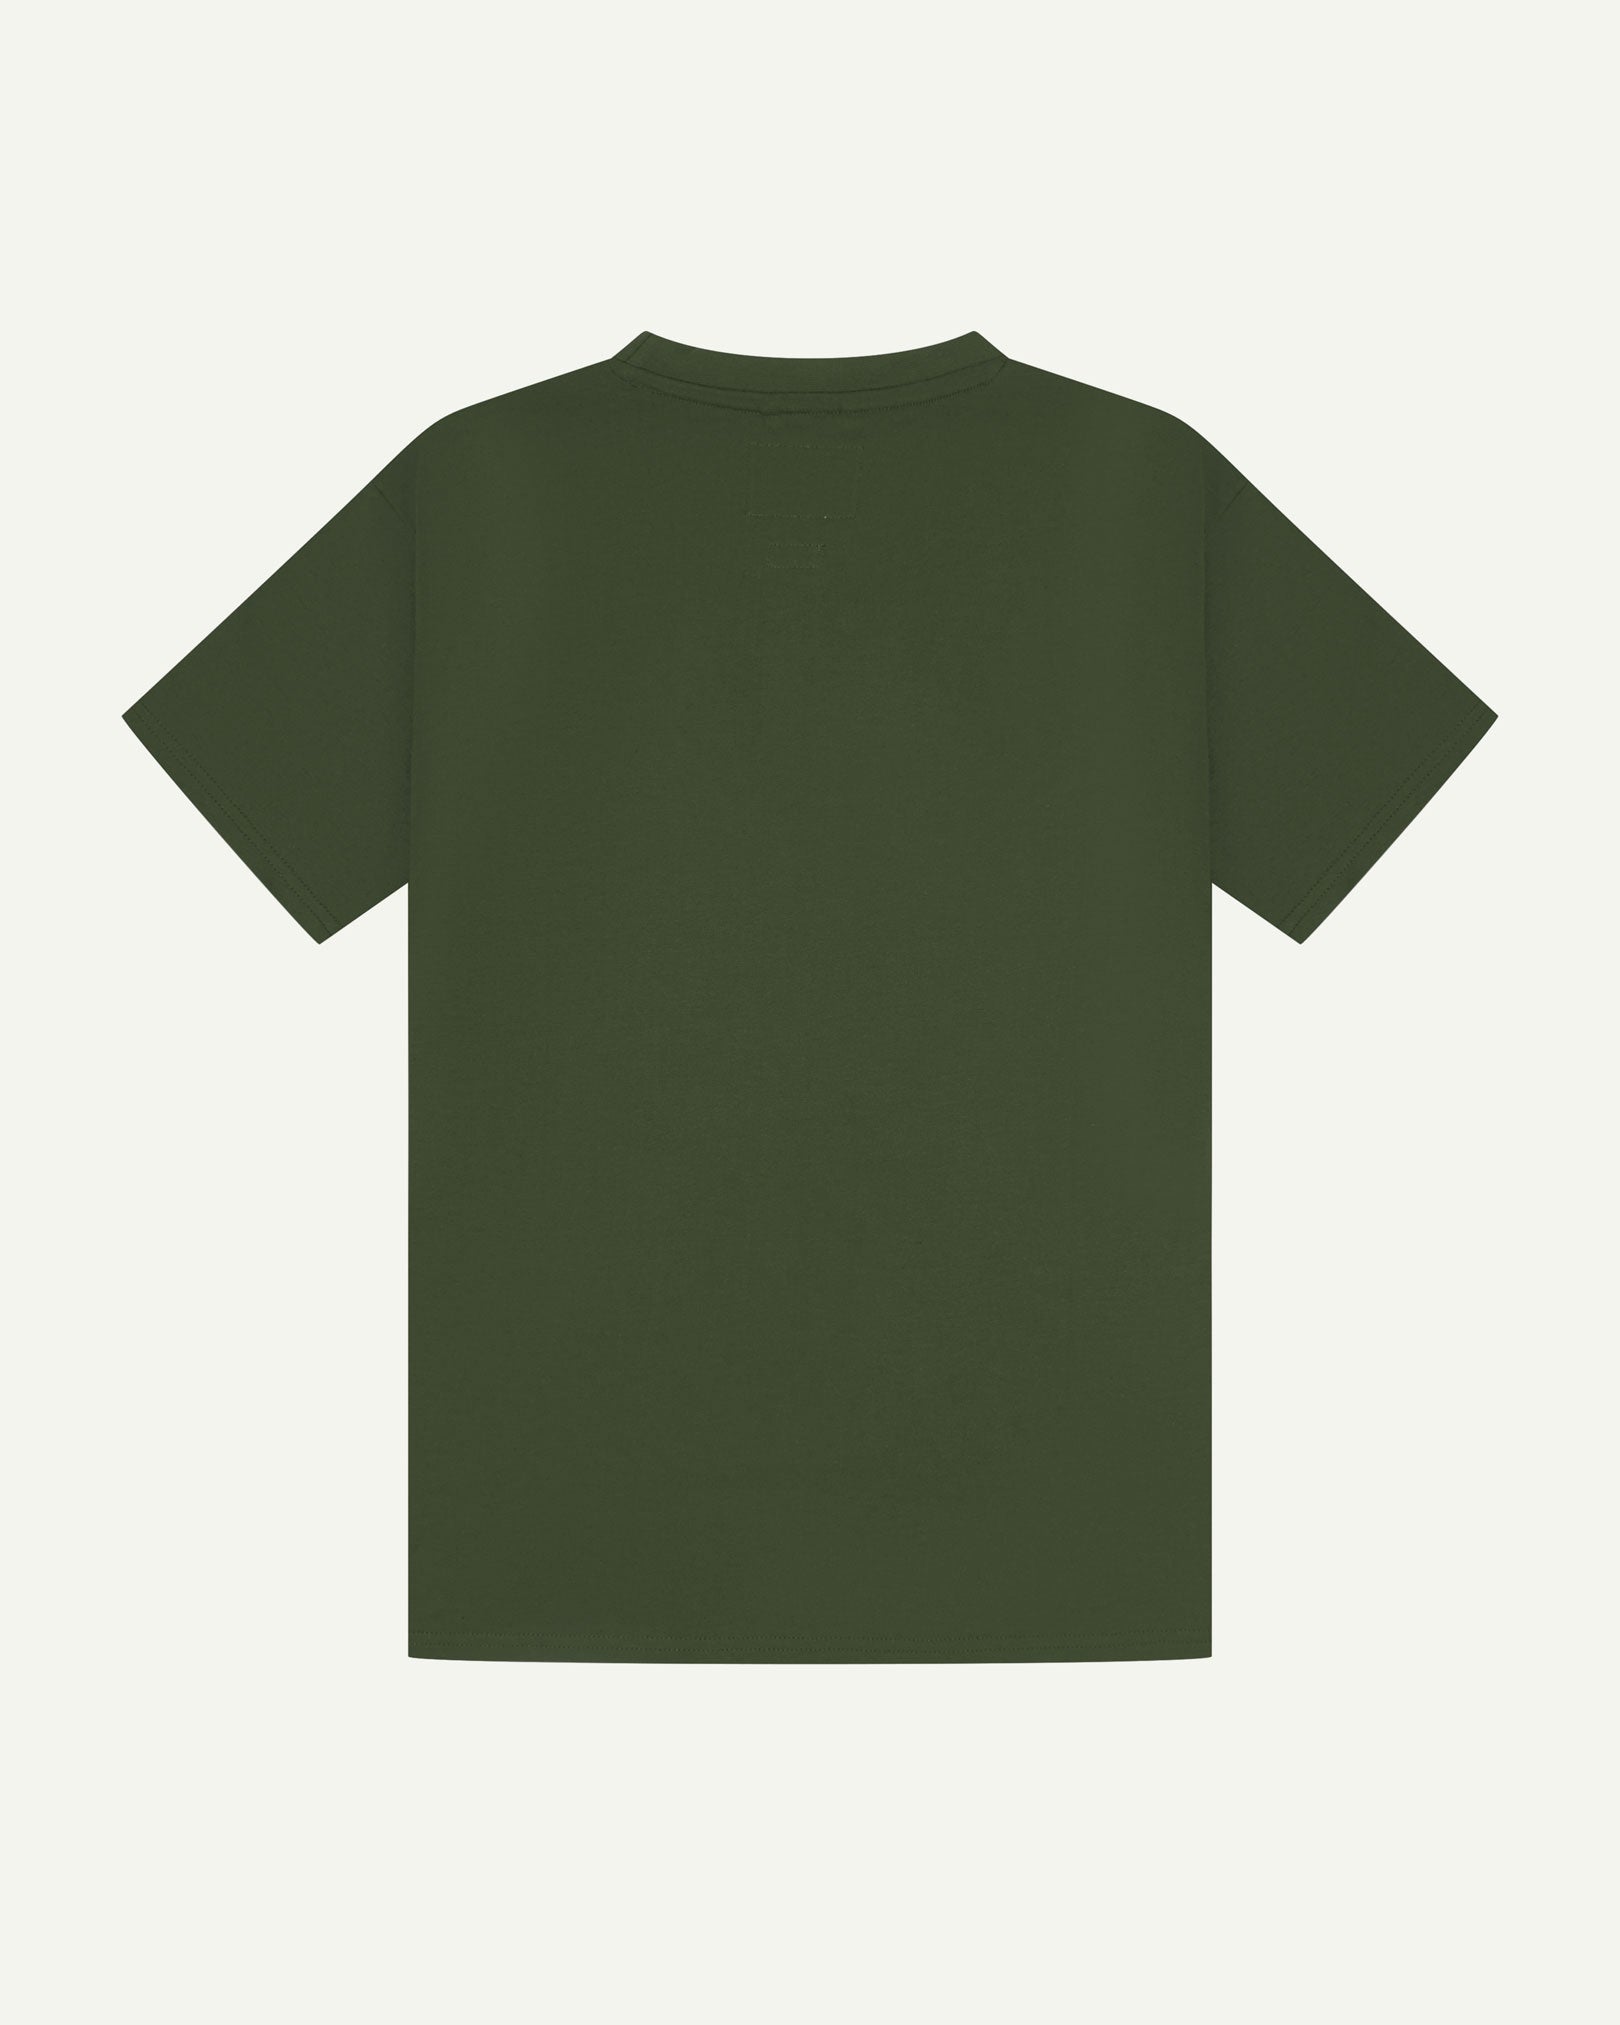 Back view of coriander green organic cotton Uskees short-sleeved T-shirt.